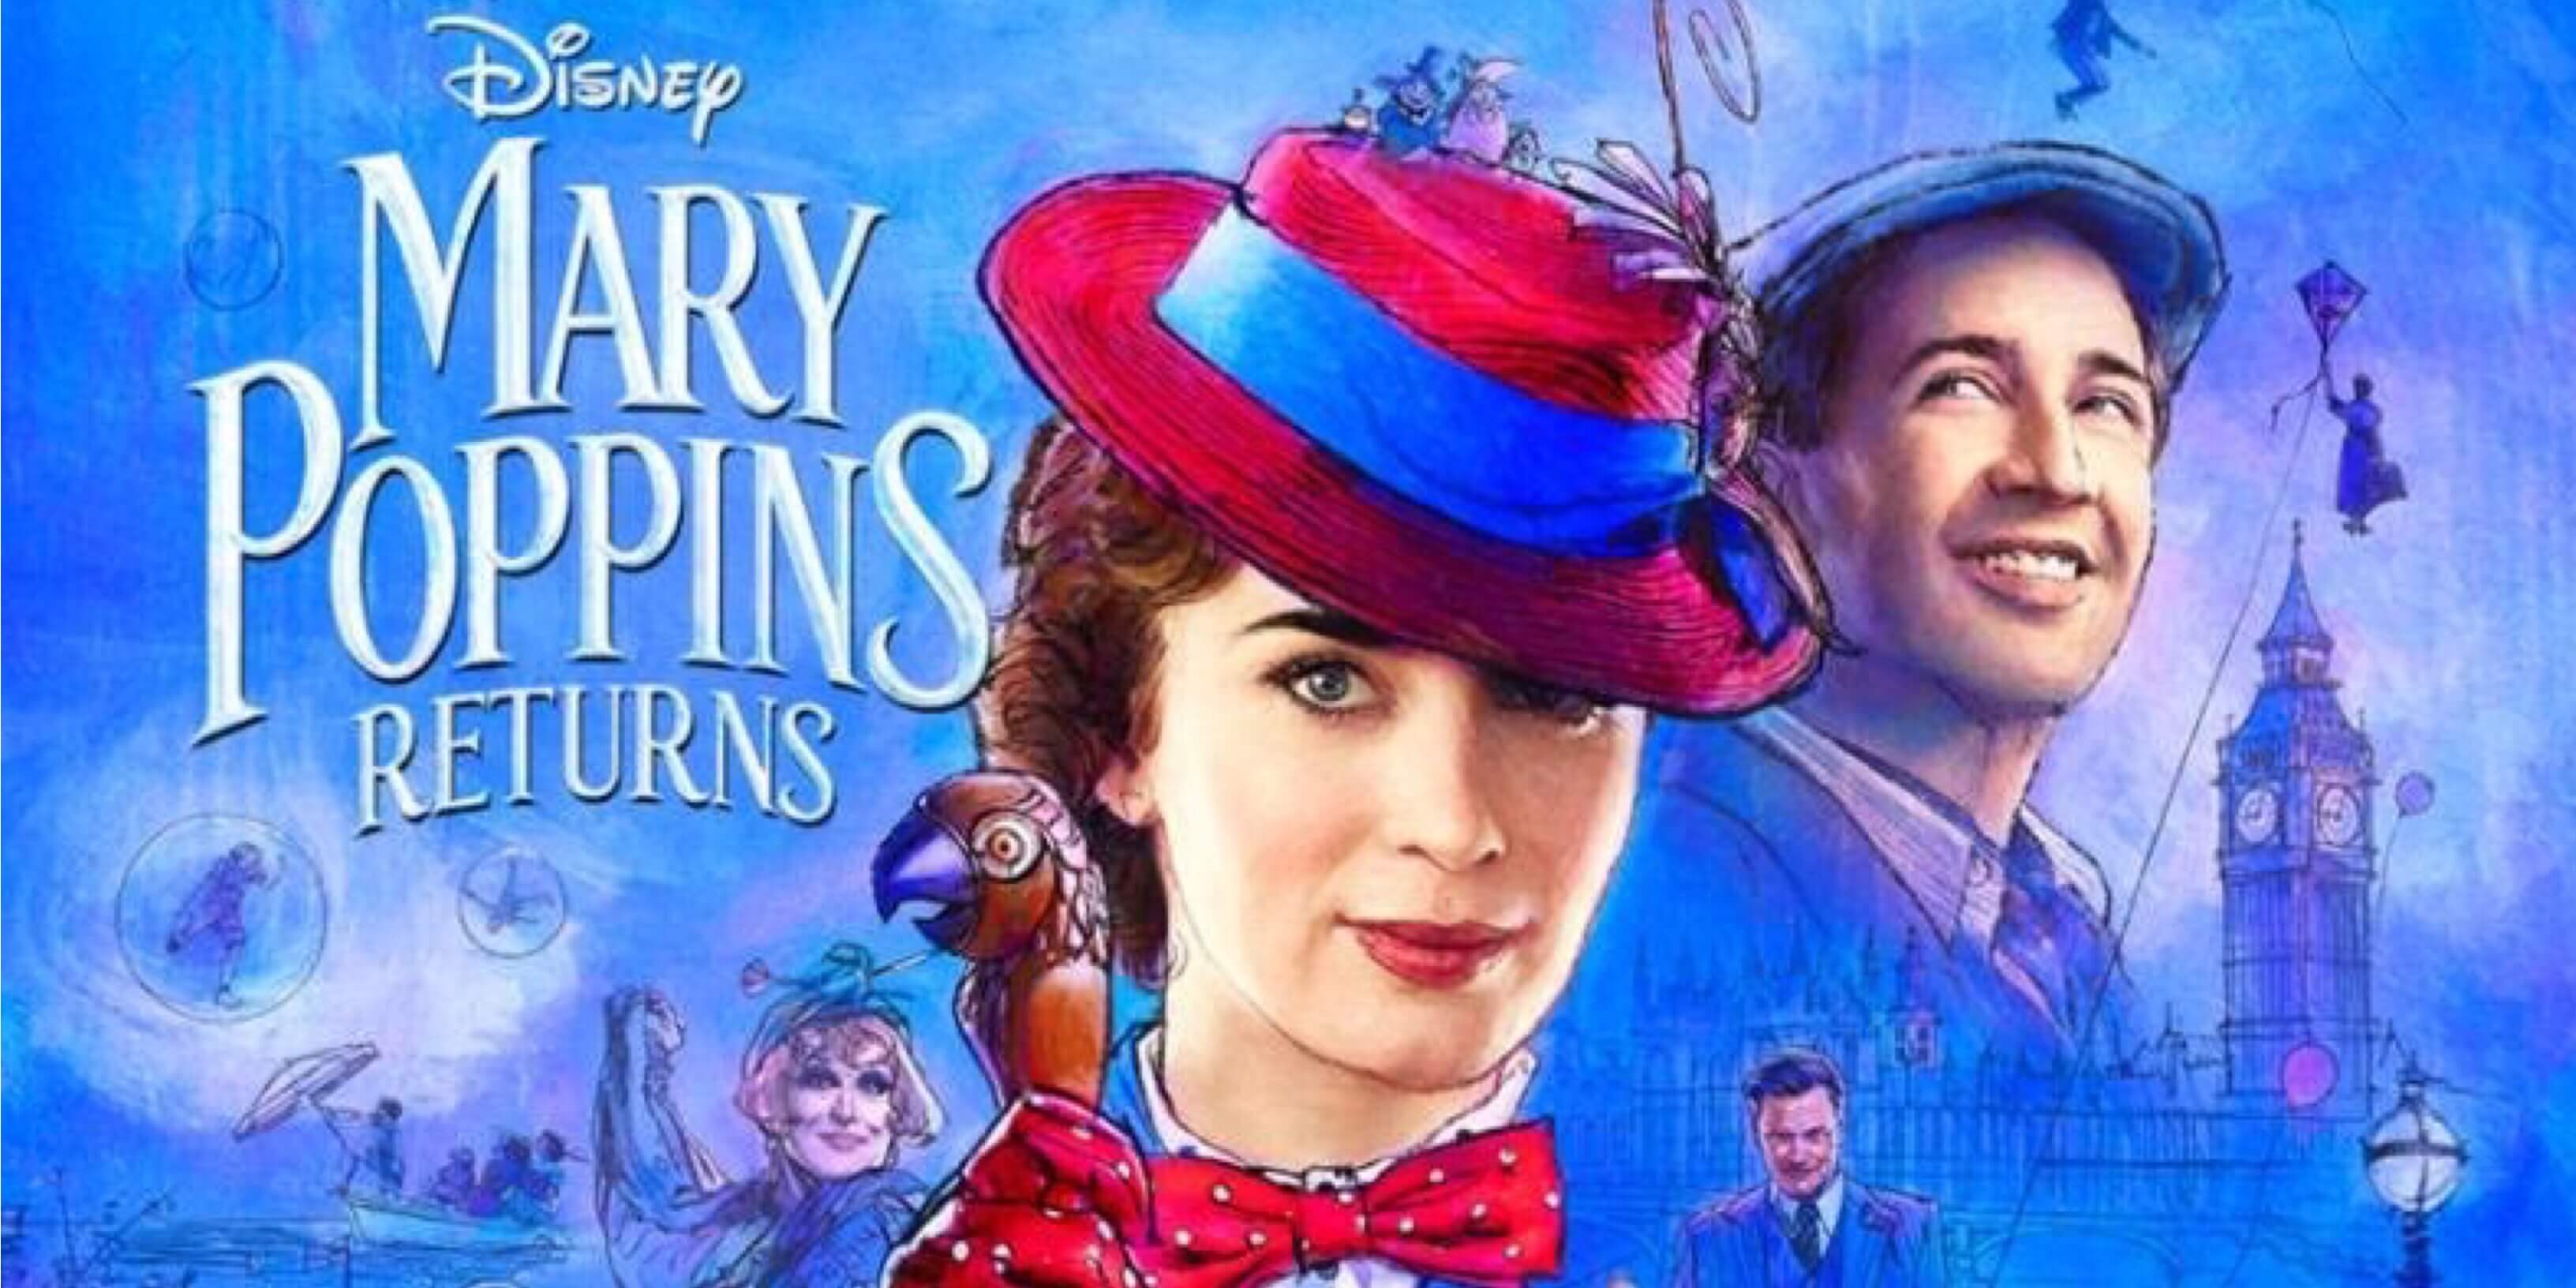 Advance Tickets For ‘Mary Poppins Returns’ On Sale Today; Soundtrack Available For Pre-Order